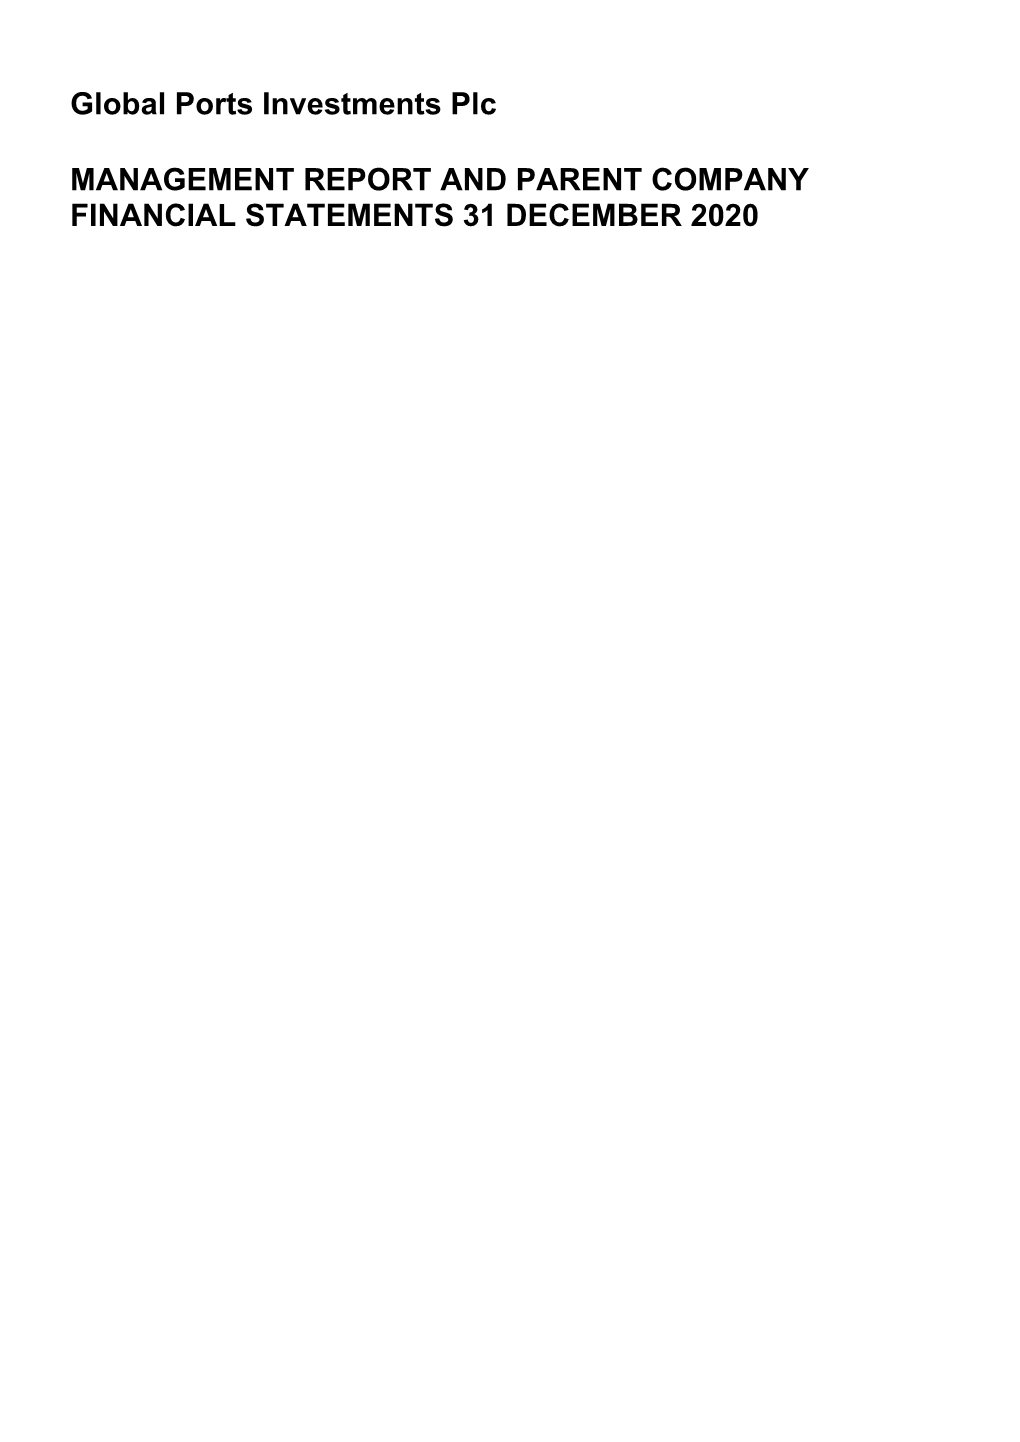 Global Ports Investments Plc MANAGEMENT REPORT AND